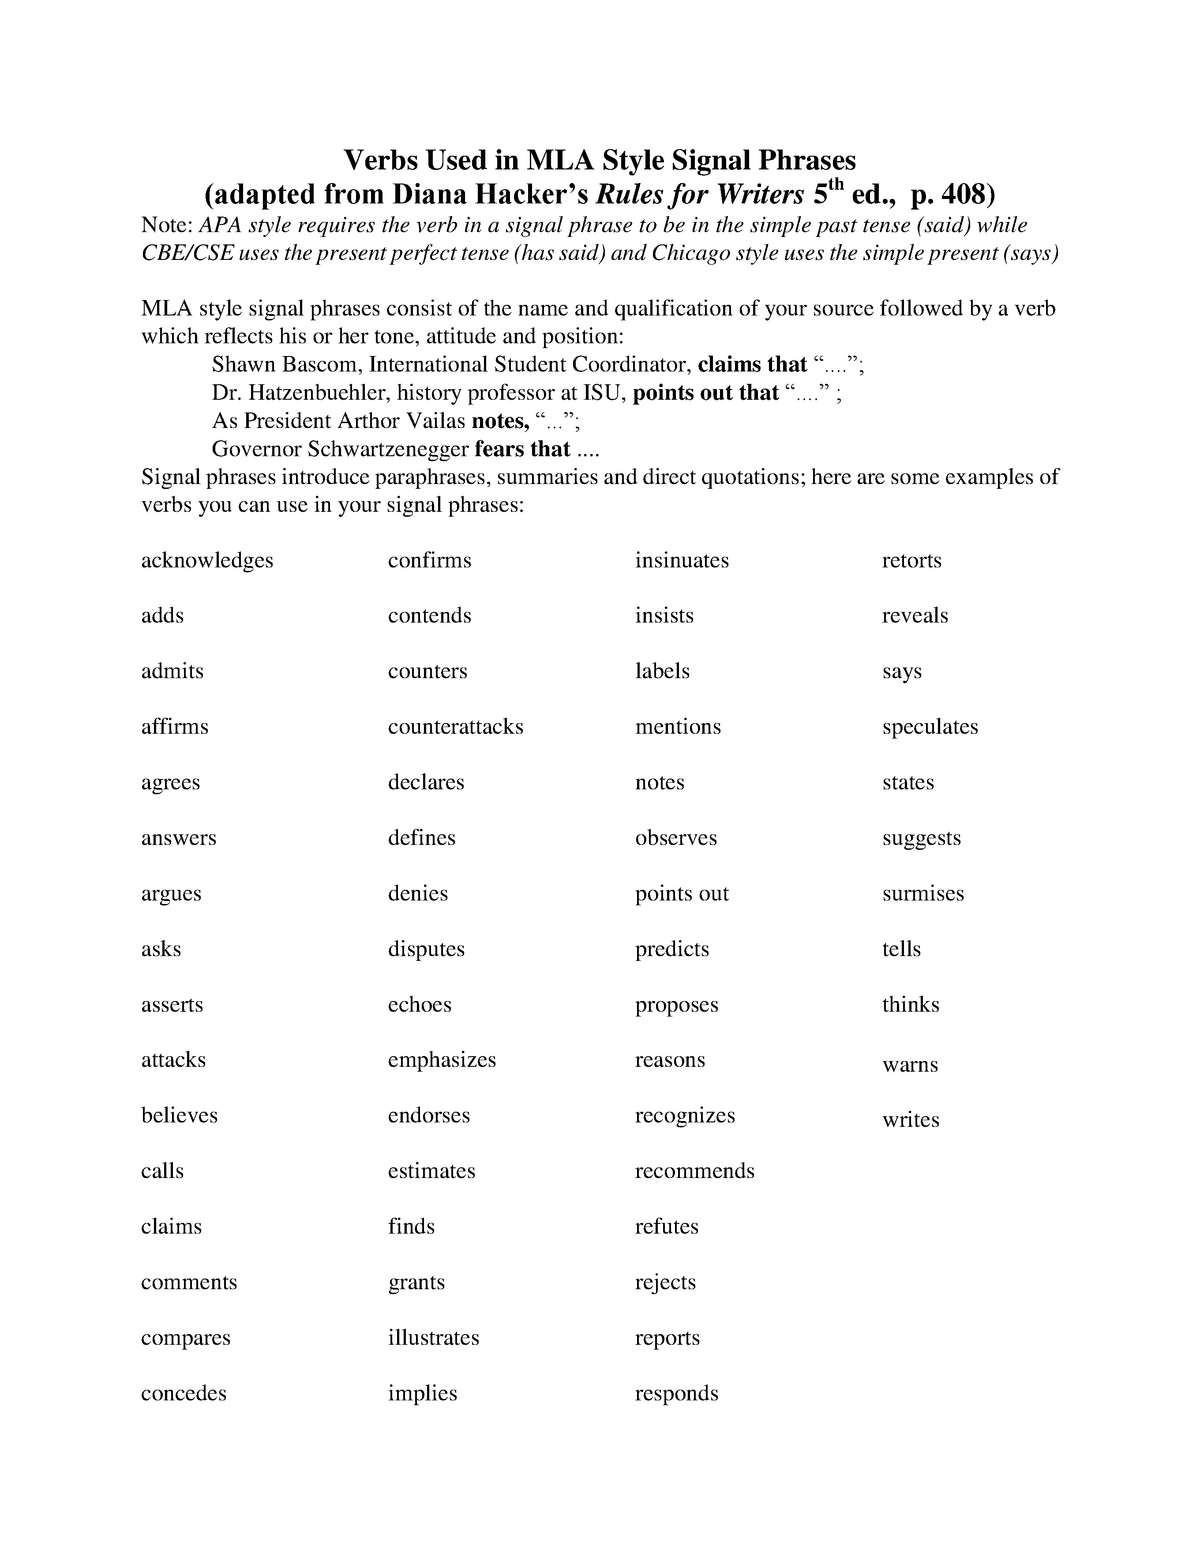 verbs-used-in-signal-phrases-rules-for-writers-rajiv-verbs-used-in-mla-style-signal-phrases